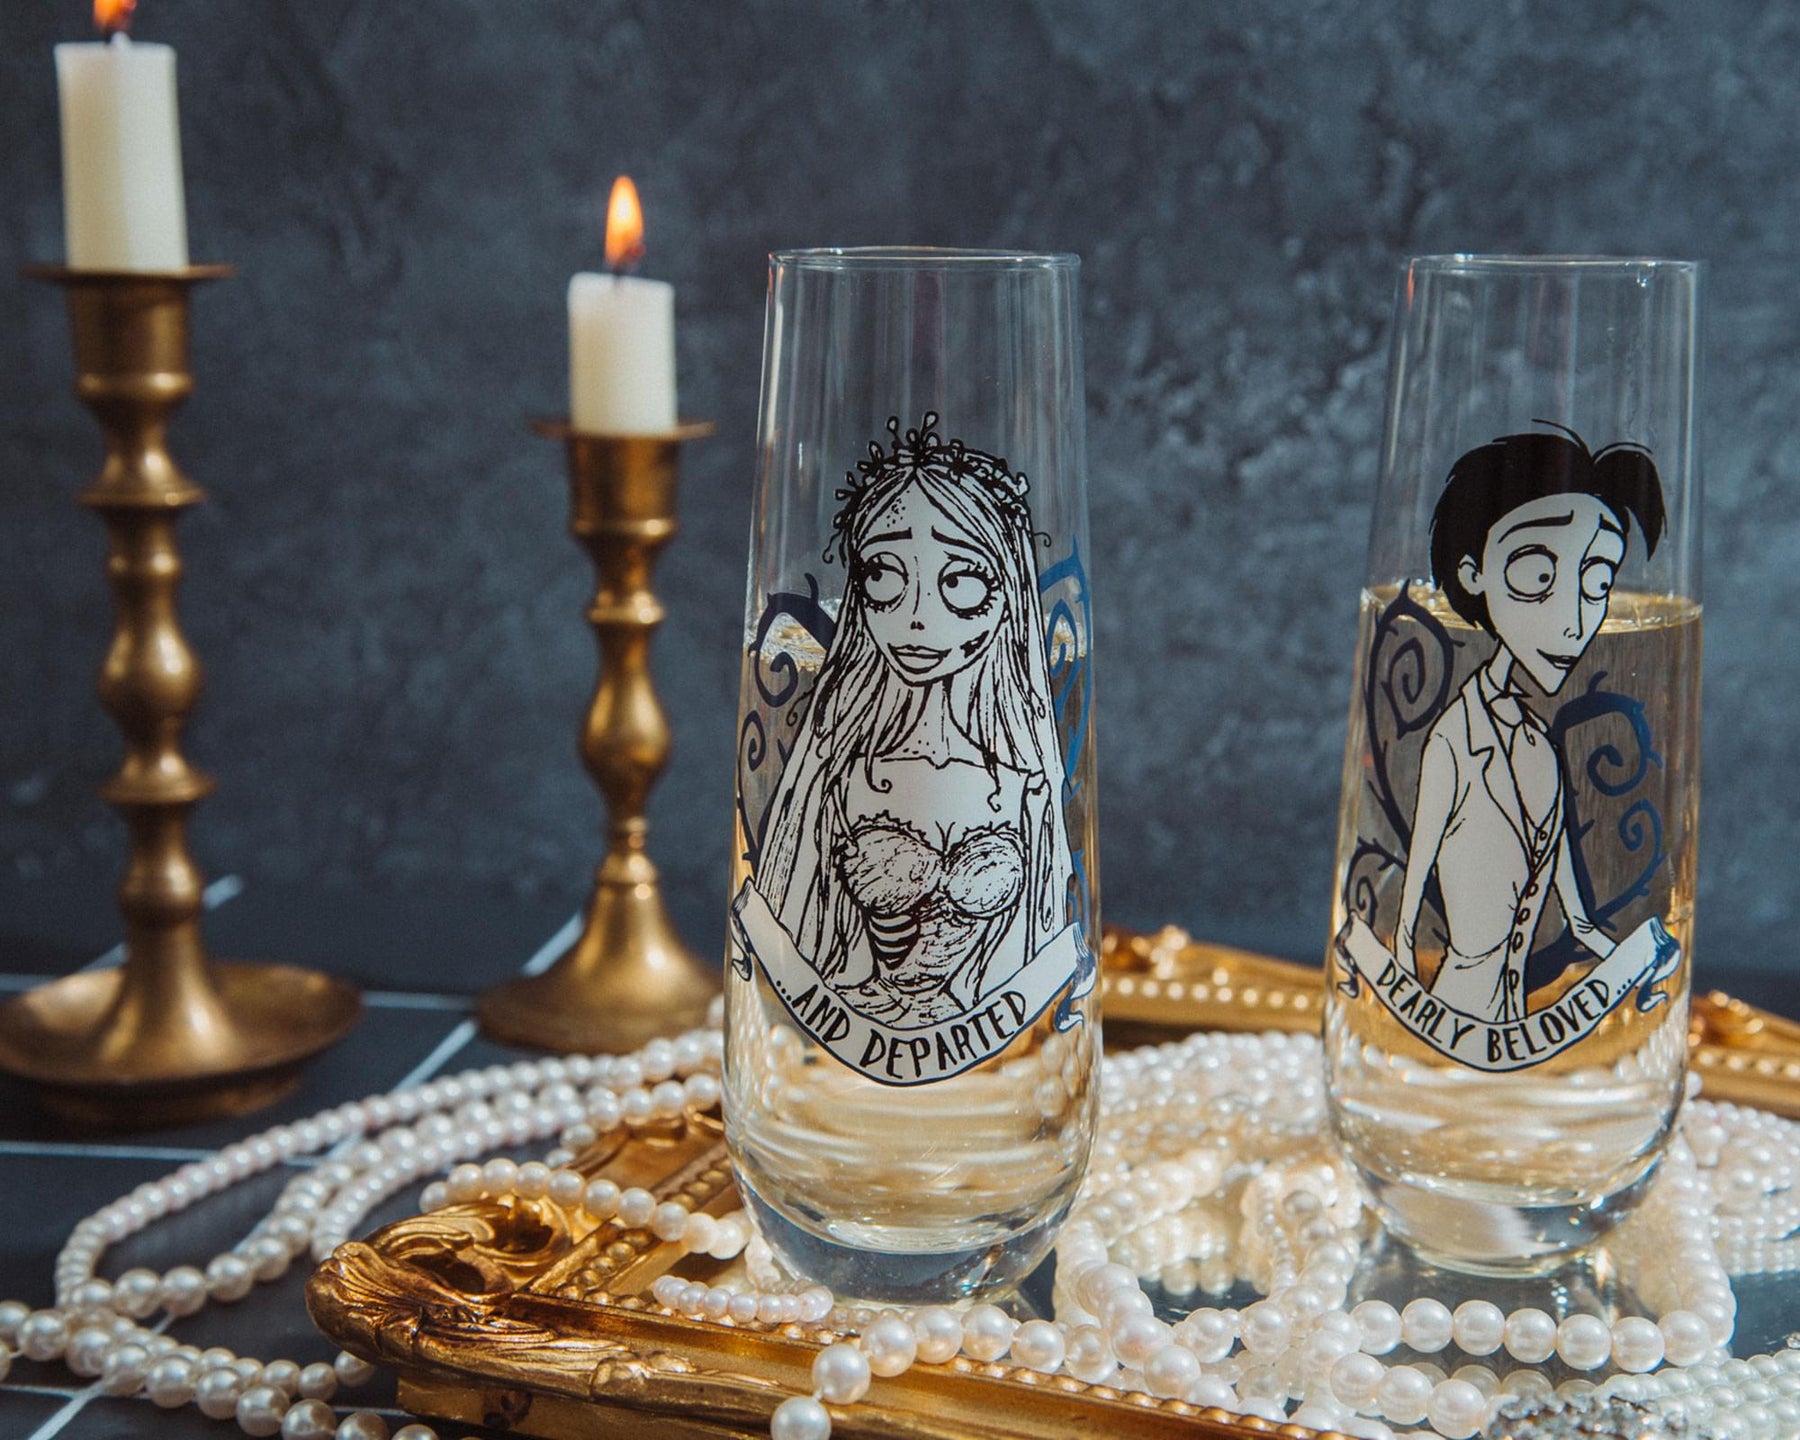 Make These Star Wars Wedding Glasses to Toast Your Geeky Love